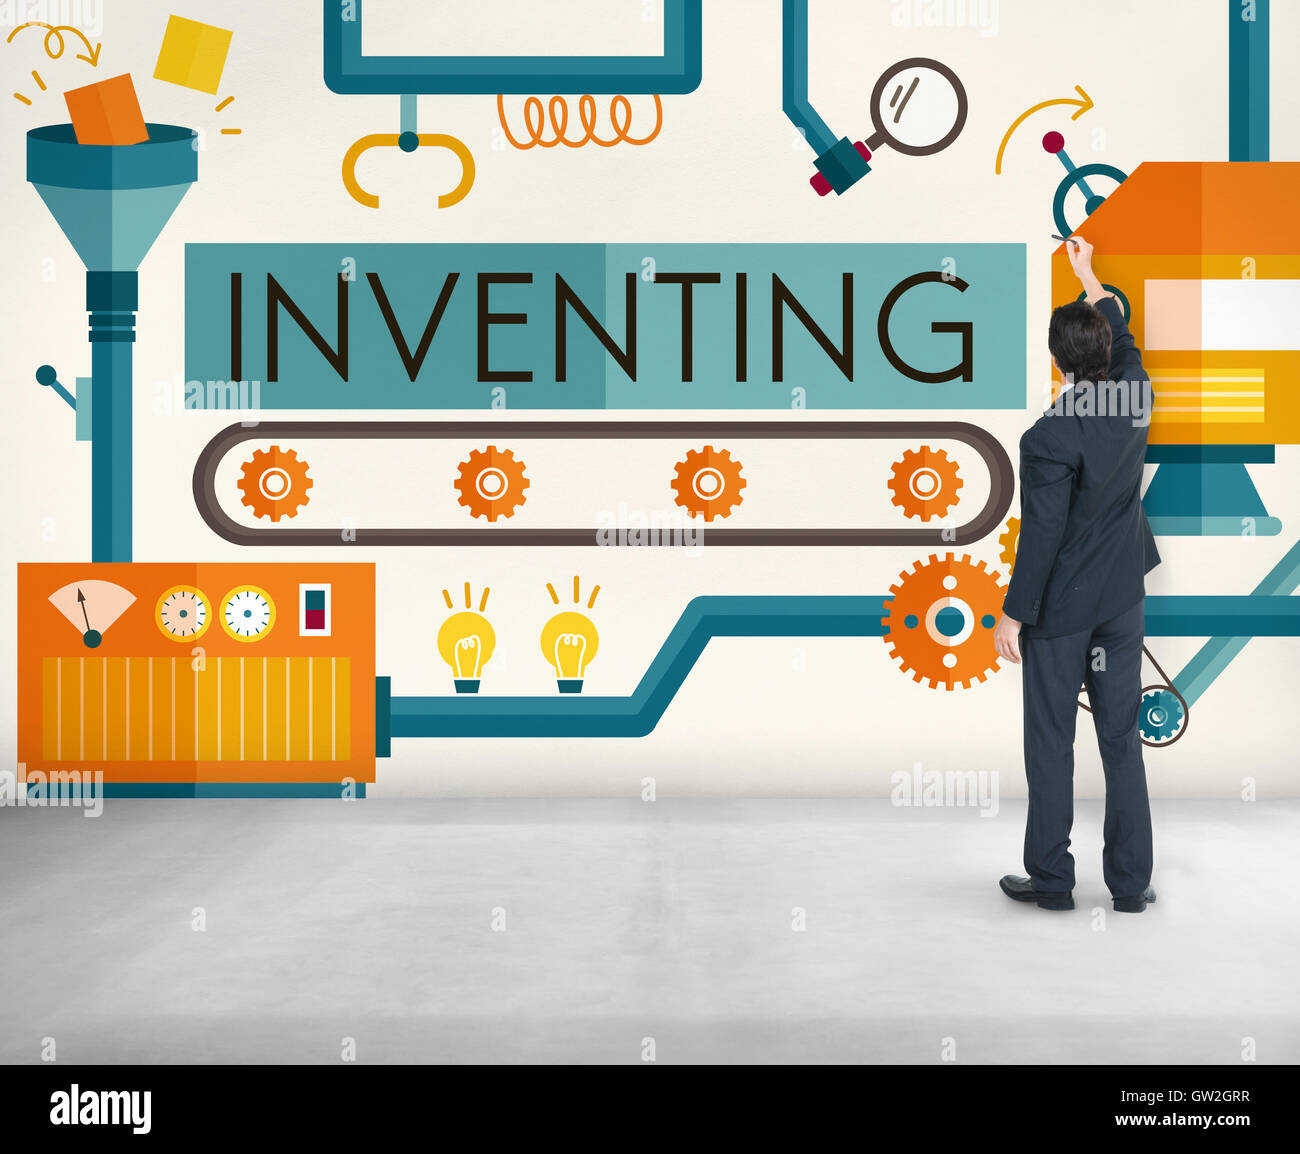 Inventing Compose Discover Production Concept Stock Photo